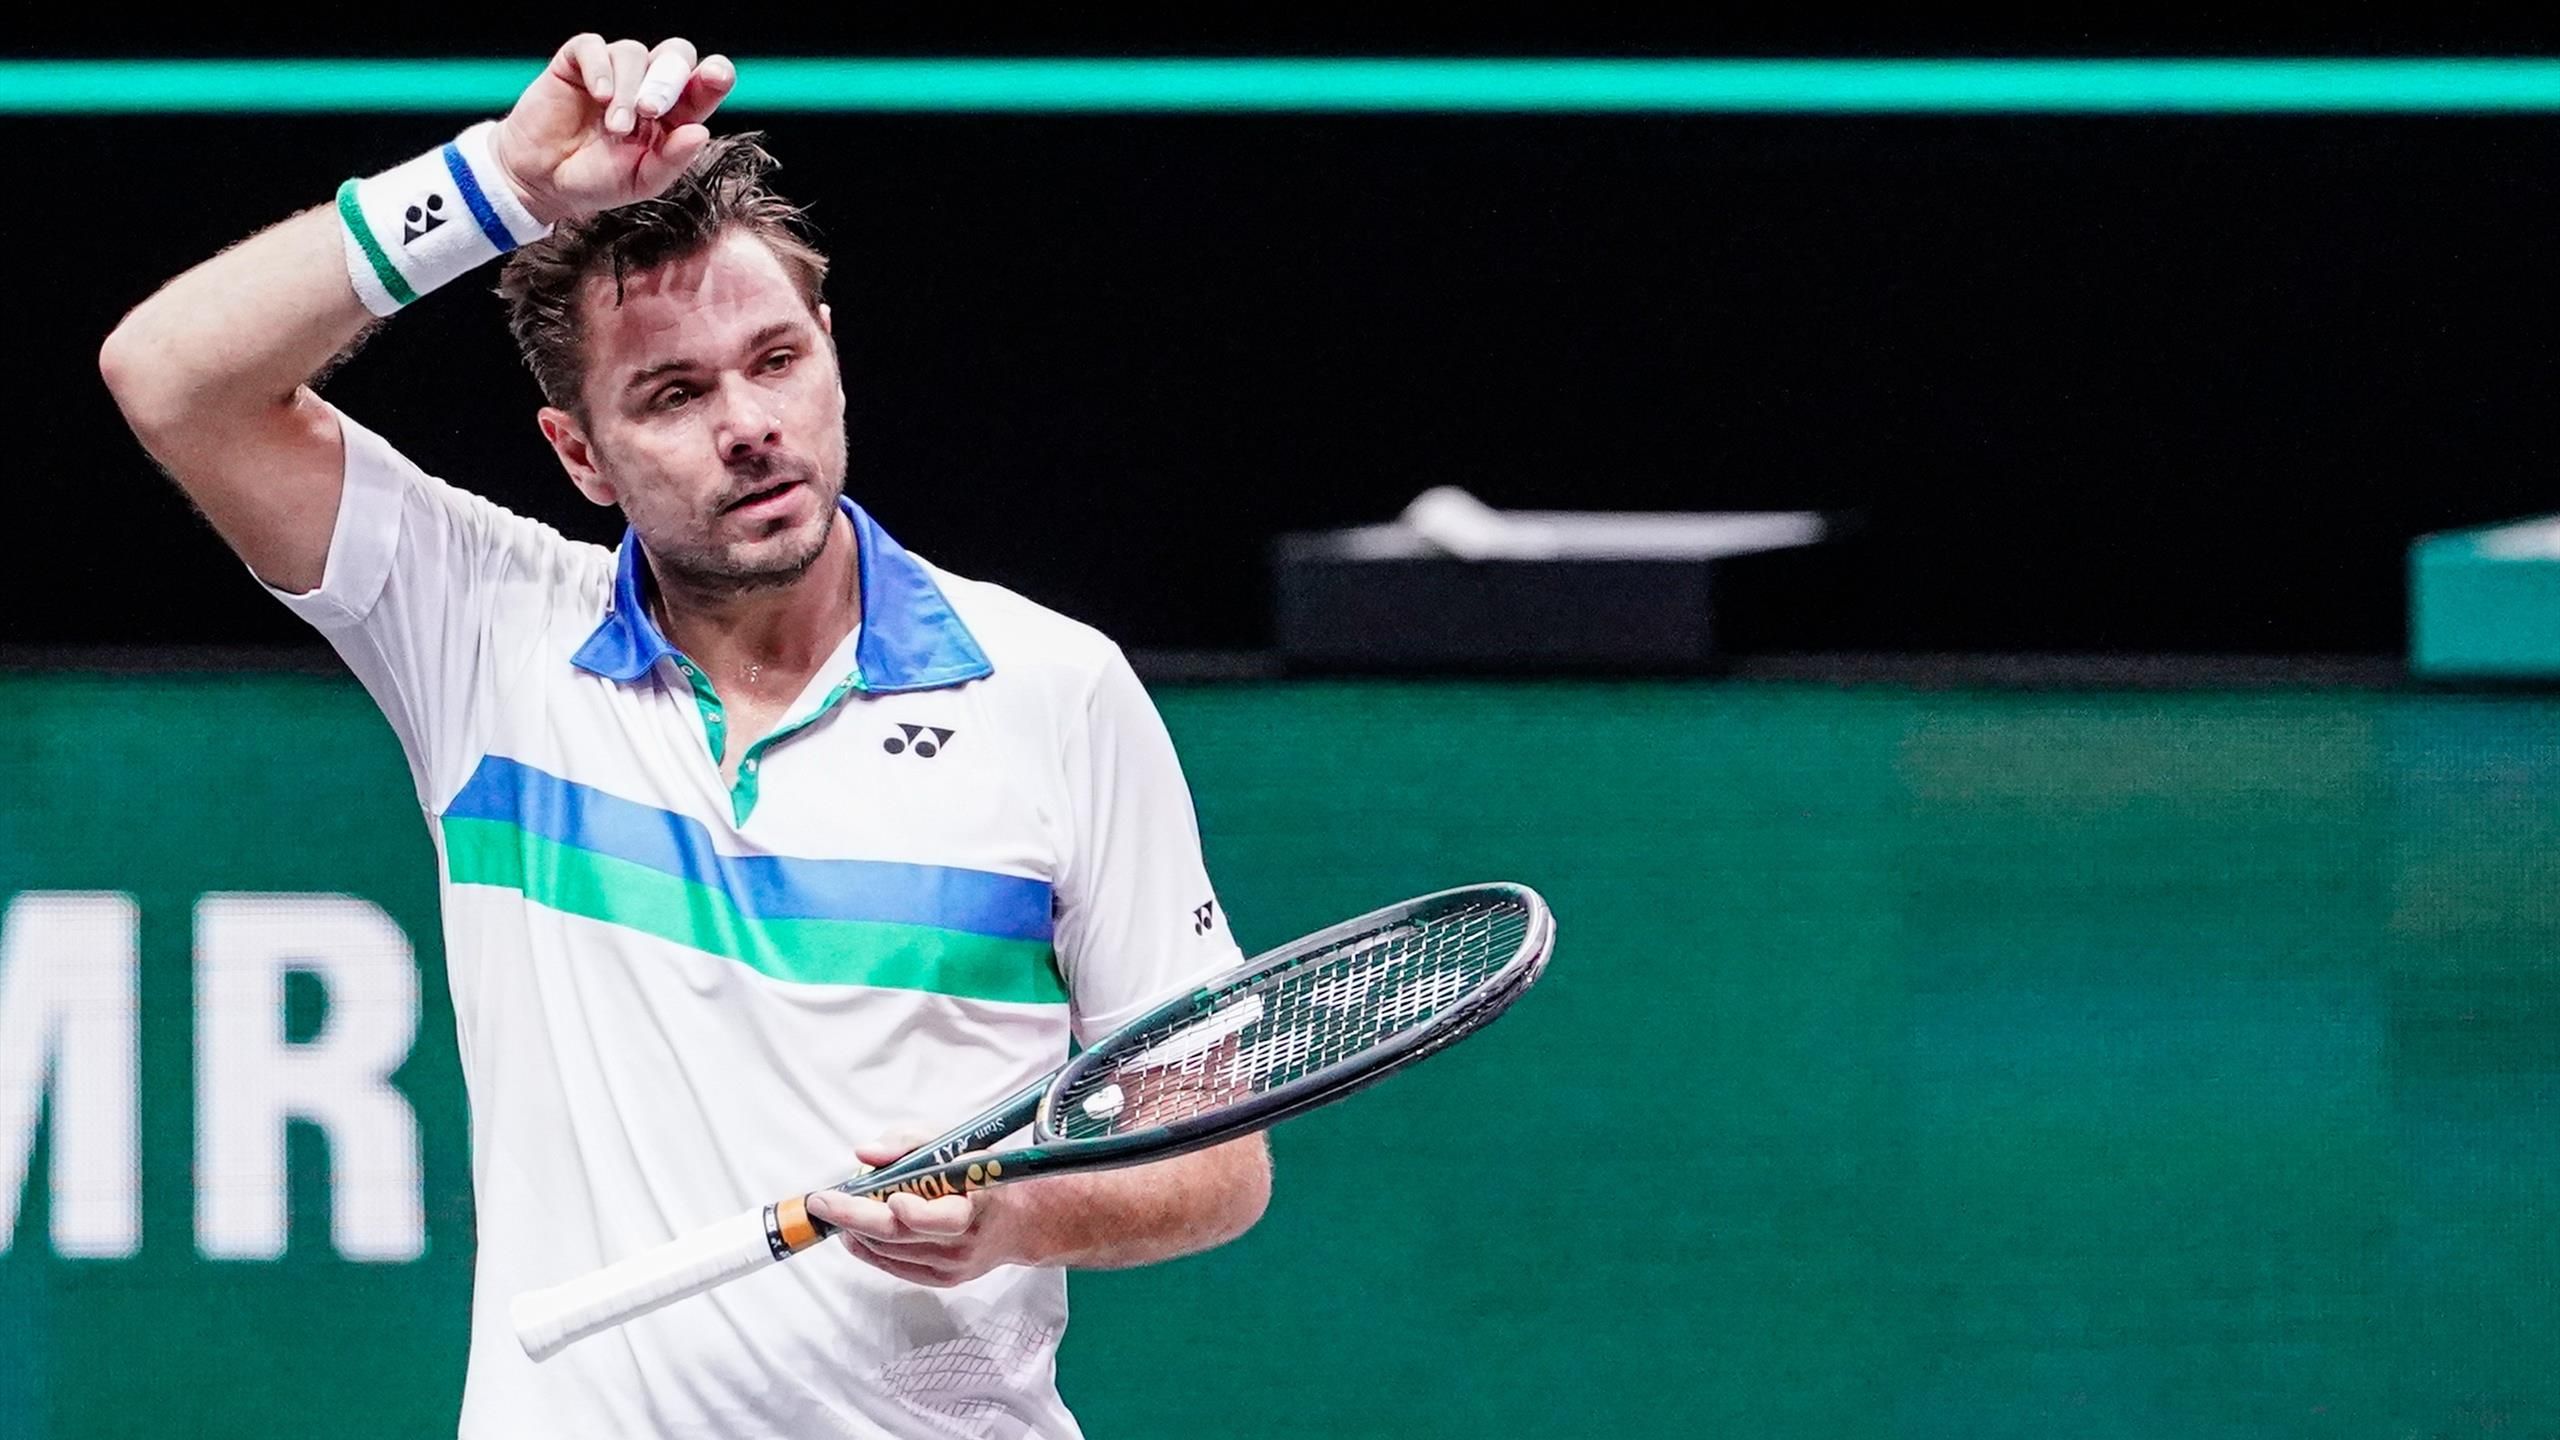 Many moments of doubt - Stanislas Wawrinka wondered if he could return to tennis from his lengthy foot injury